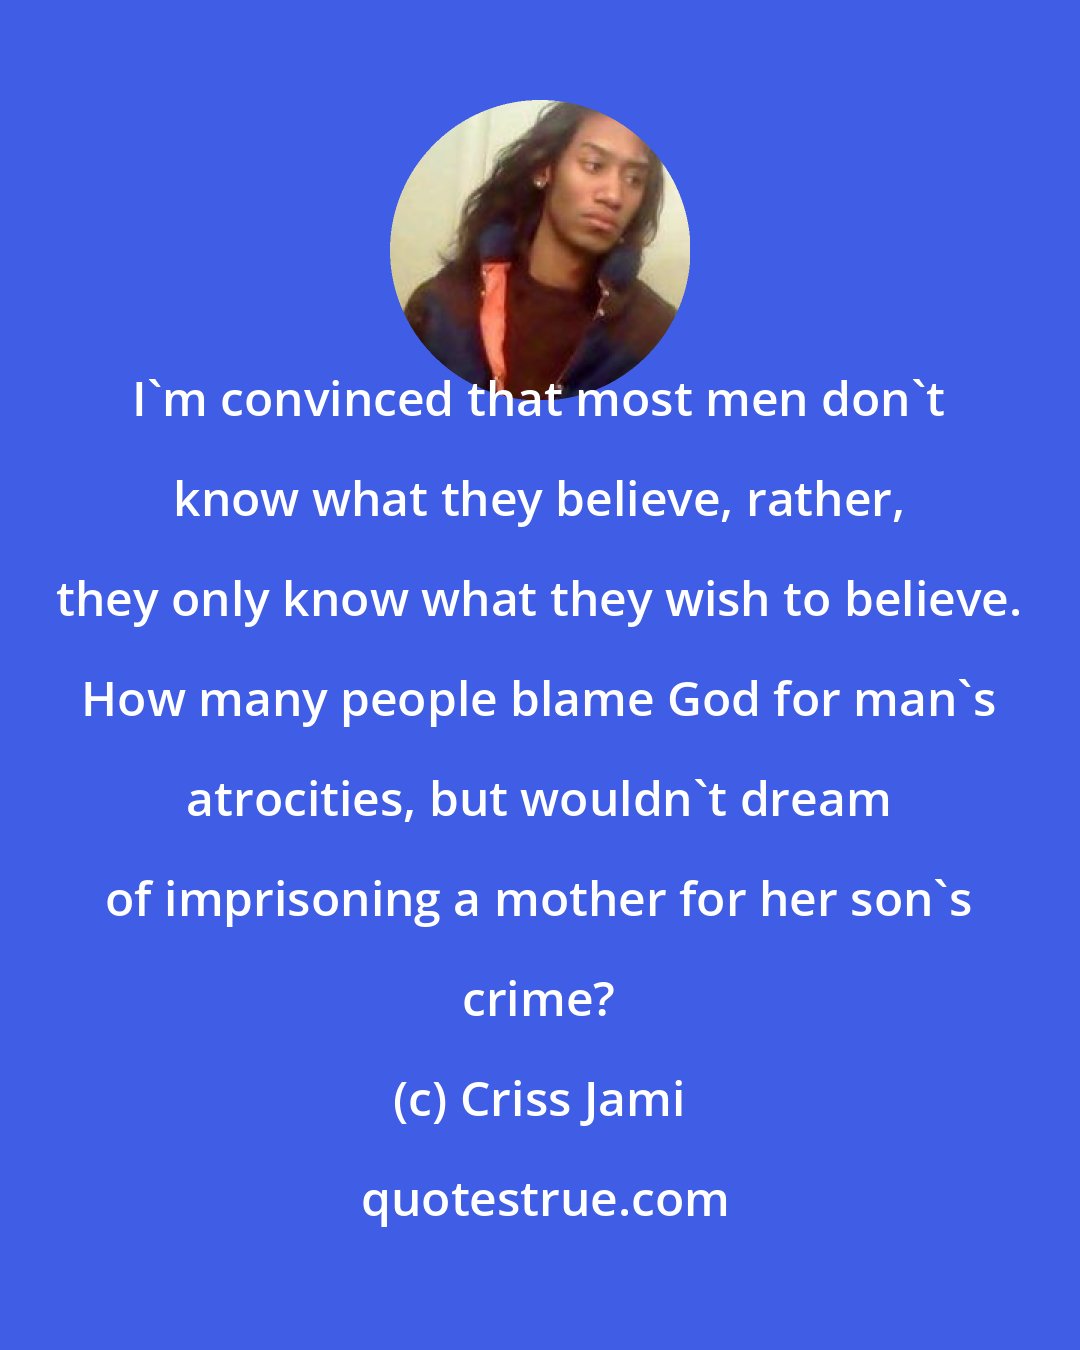 Criss Jami: I'm convinced that most men don't know what they believe, rather, they only know what they wish to believe. How many people blame God for man's atrocities, but wouldn't dream of imprisoning a mother for her son's crime?